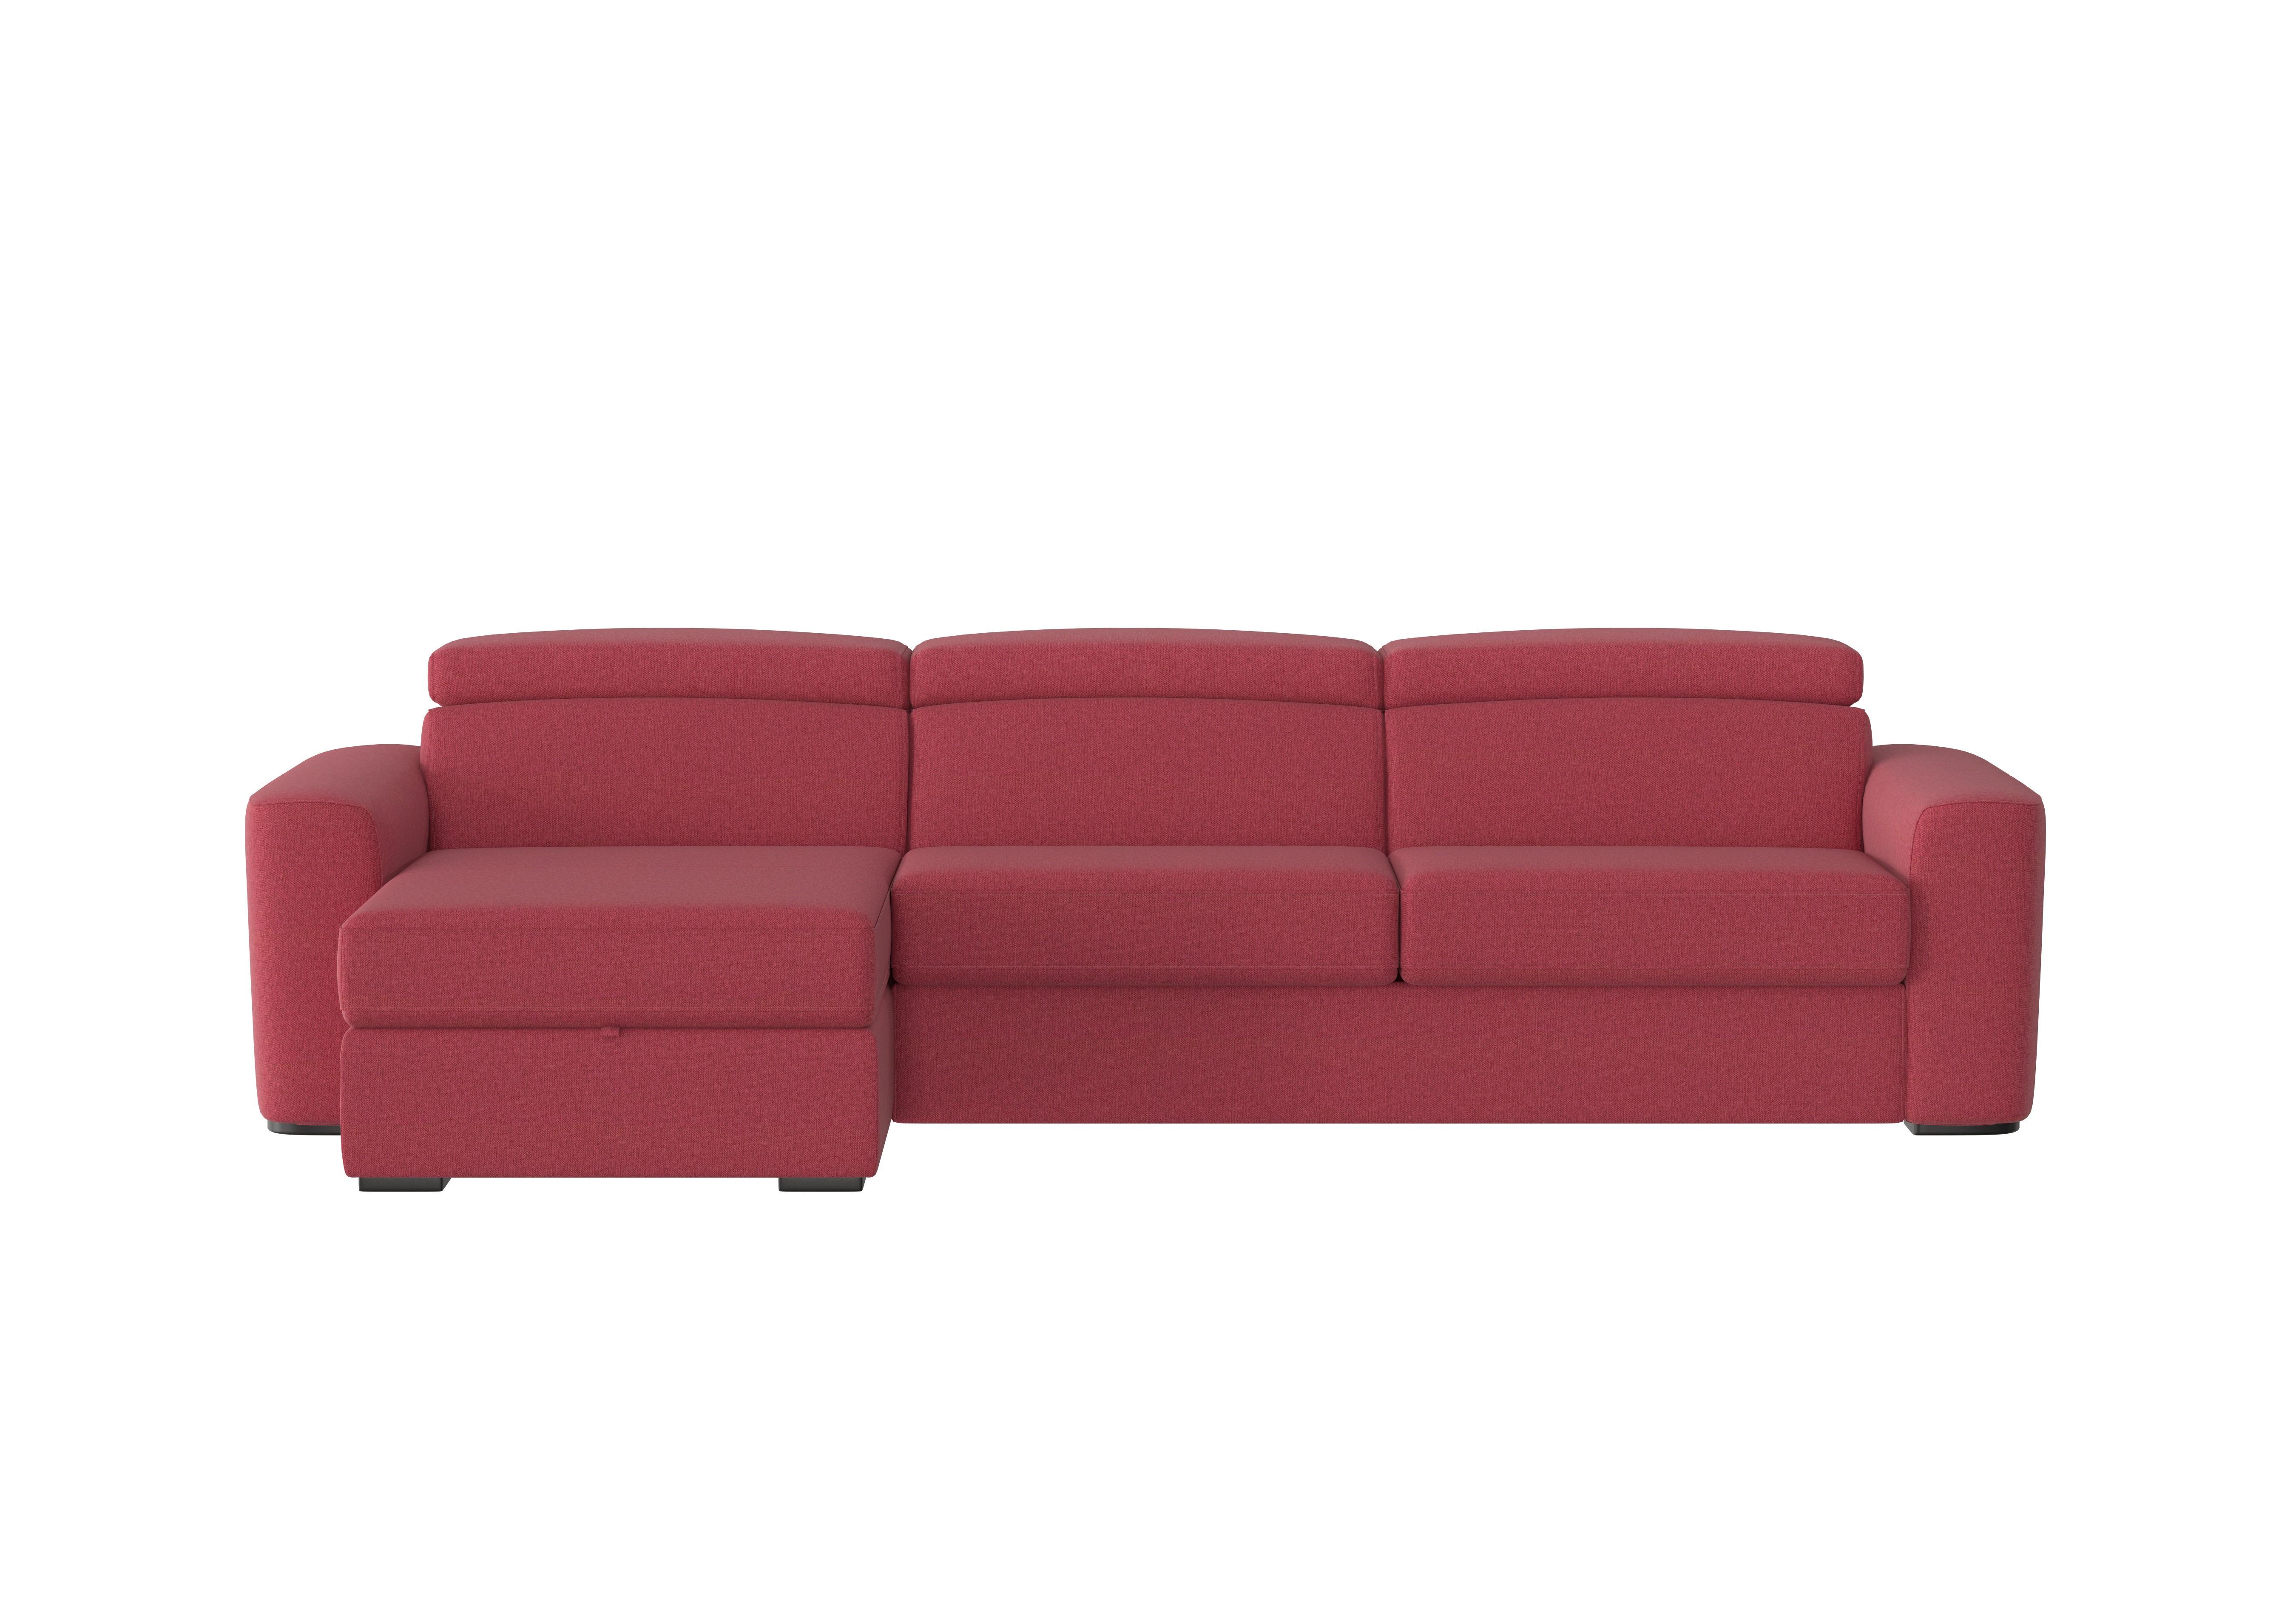 Infinity Fabric Corner Chaise Sofa with Storage in Fab-Blt-R29 Red on Furniture Village